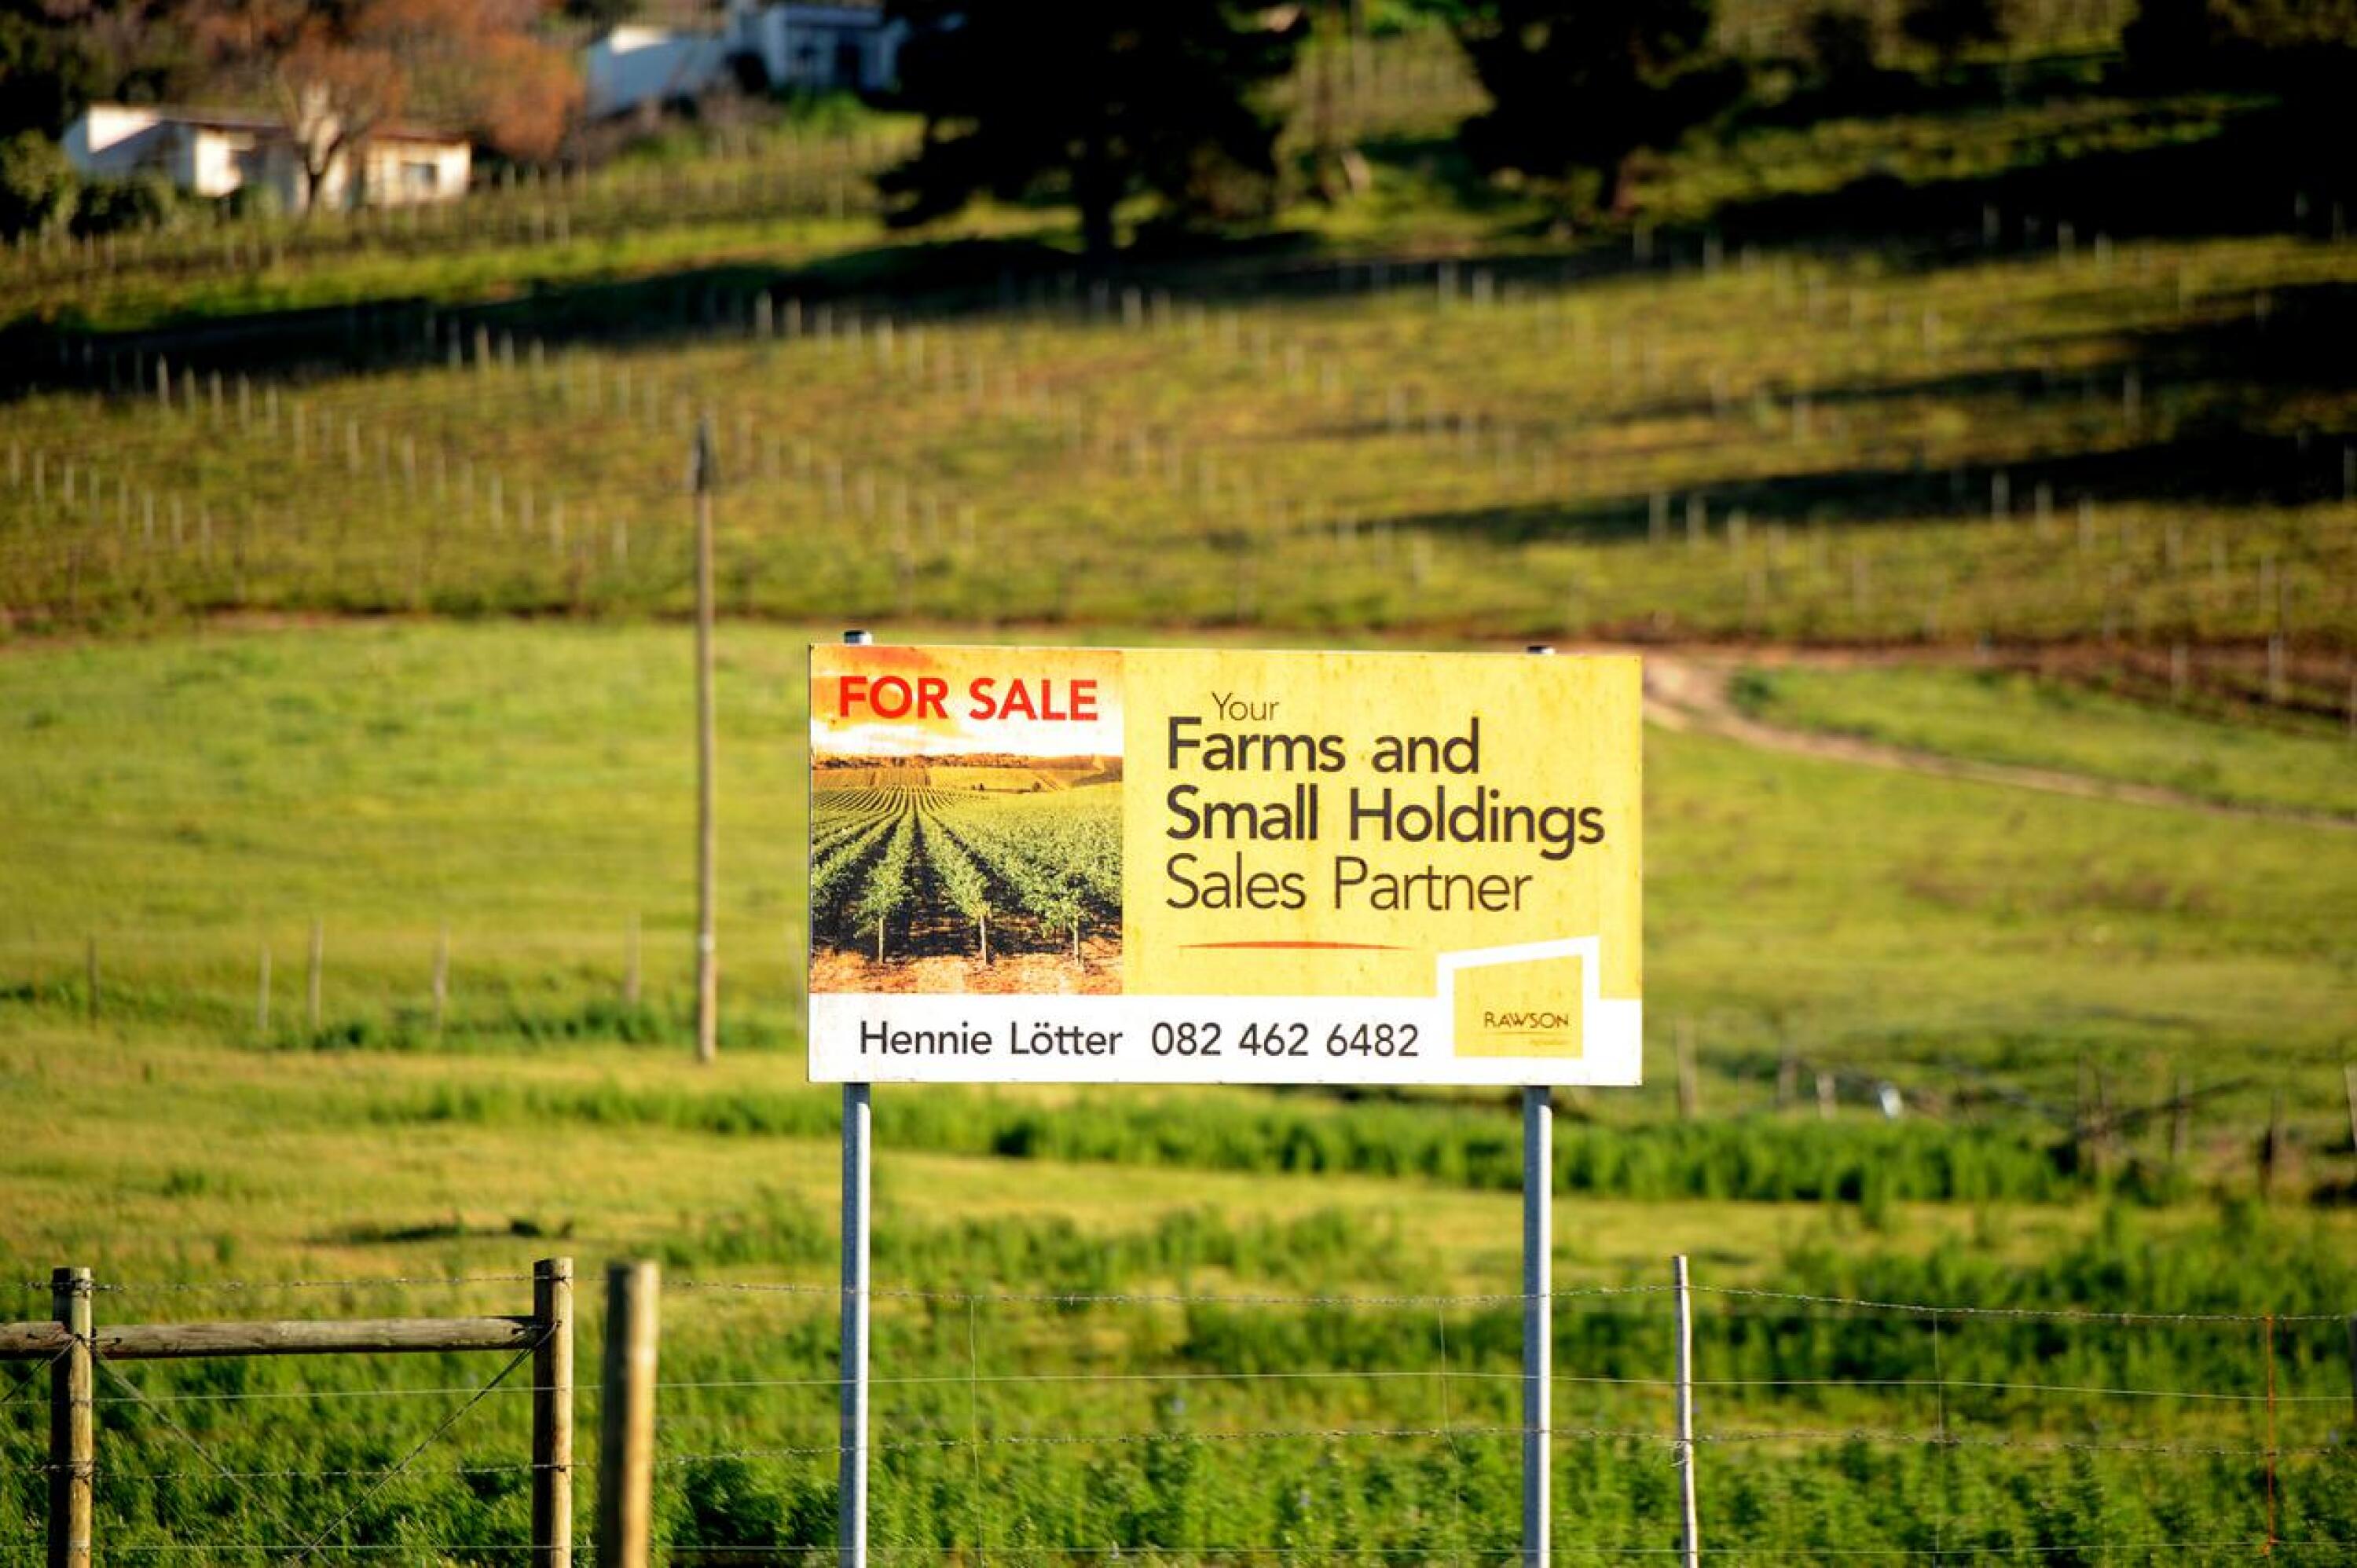 Forging ahead with land expropriation without compensation could see South Africa experiencing unprecedented inflation and massive capital outflows.